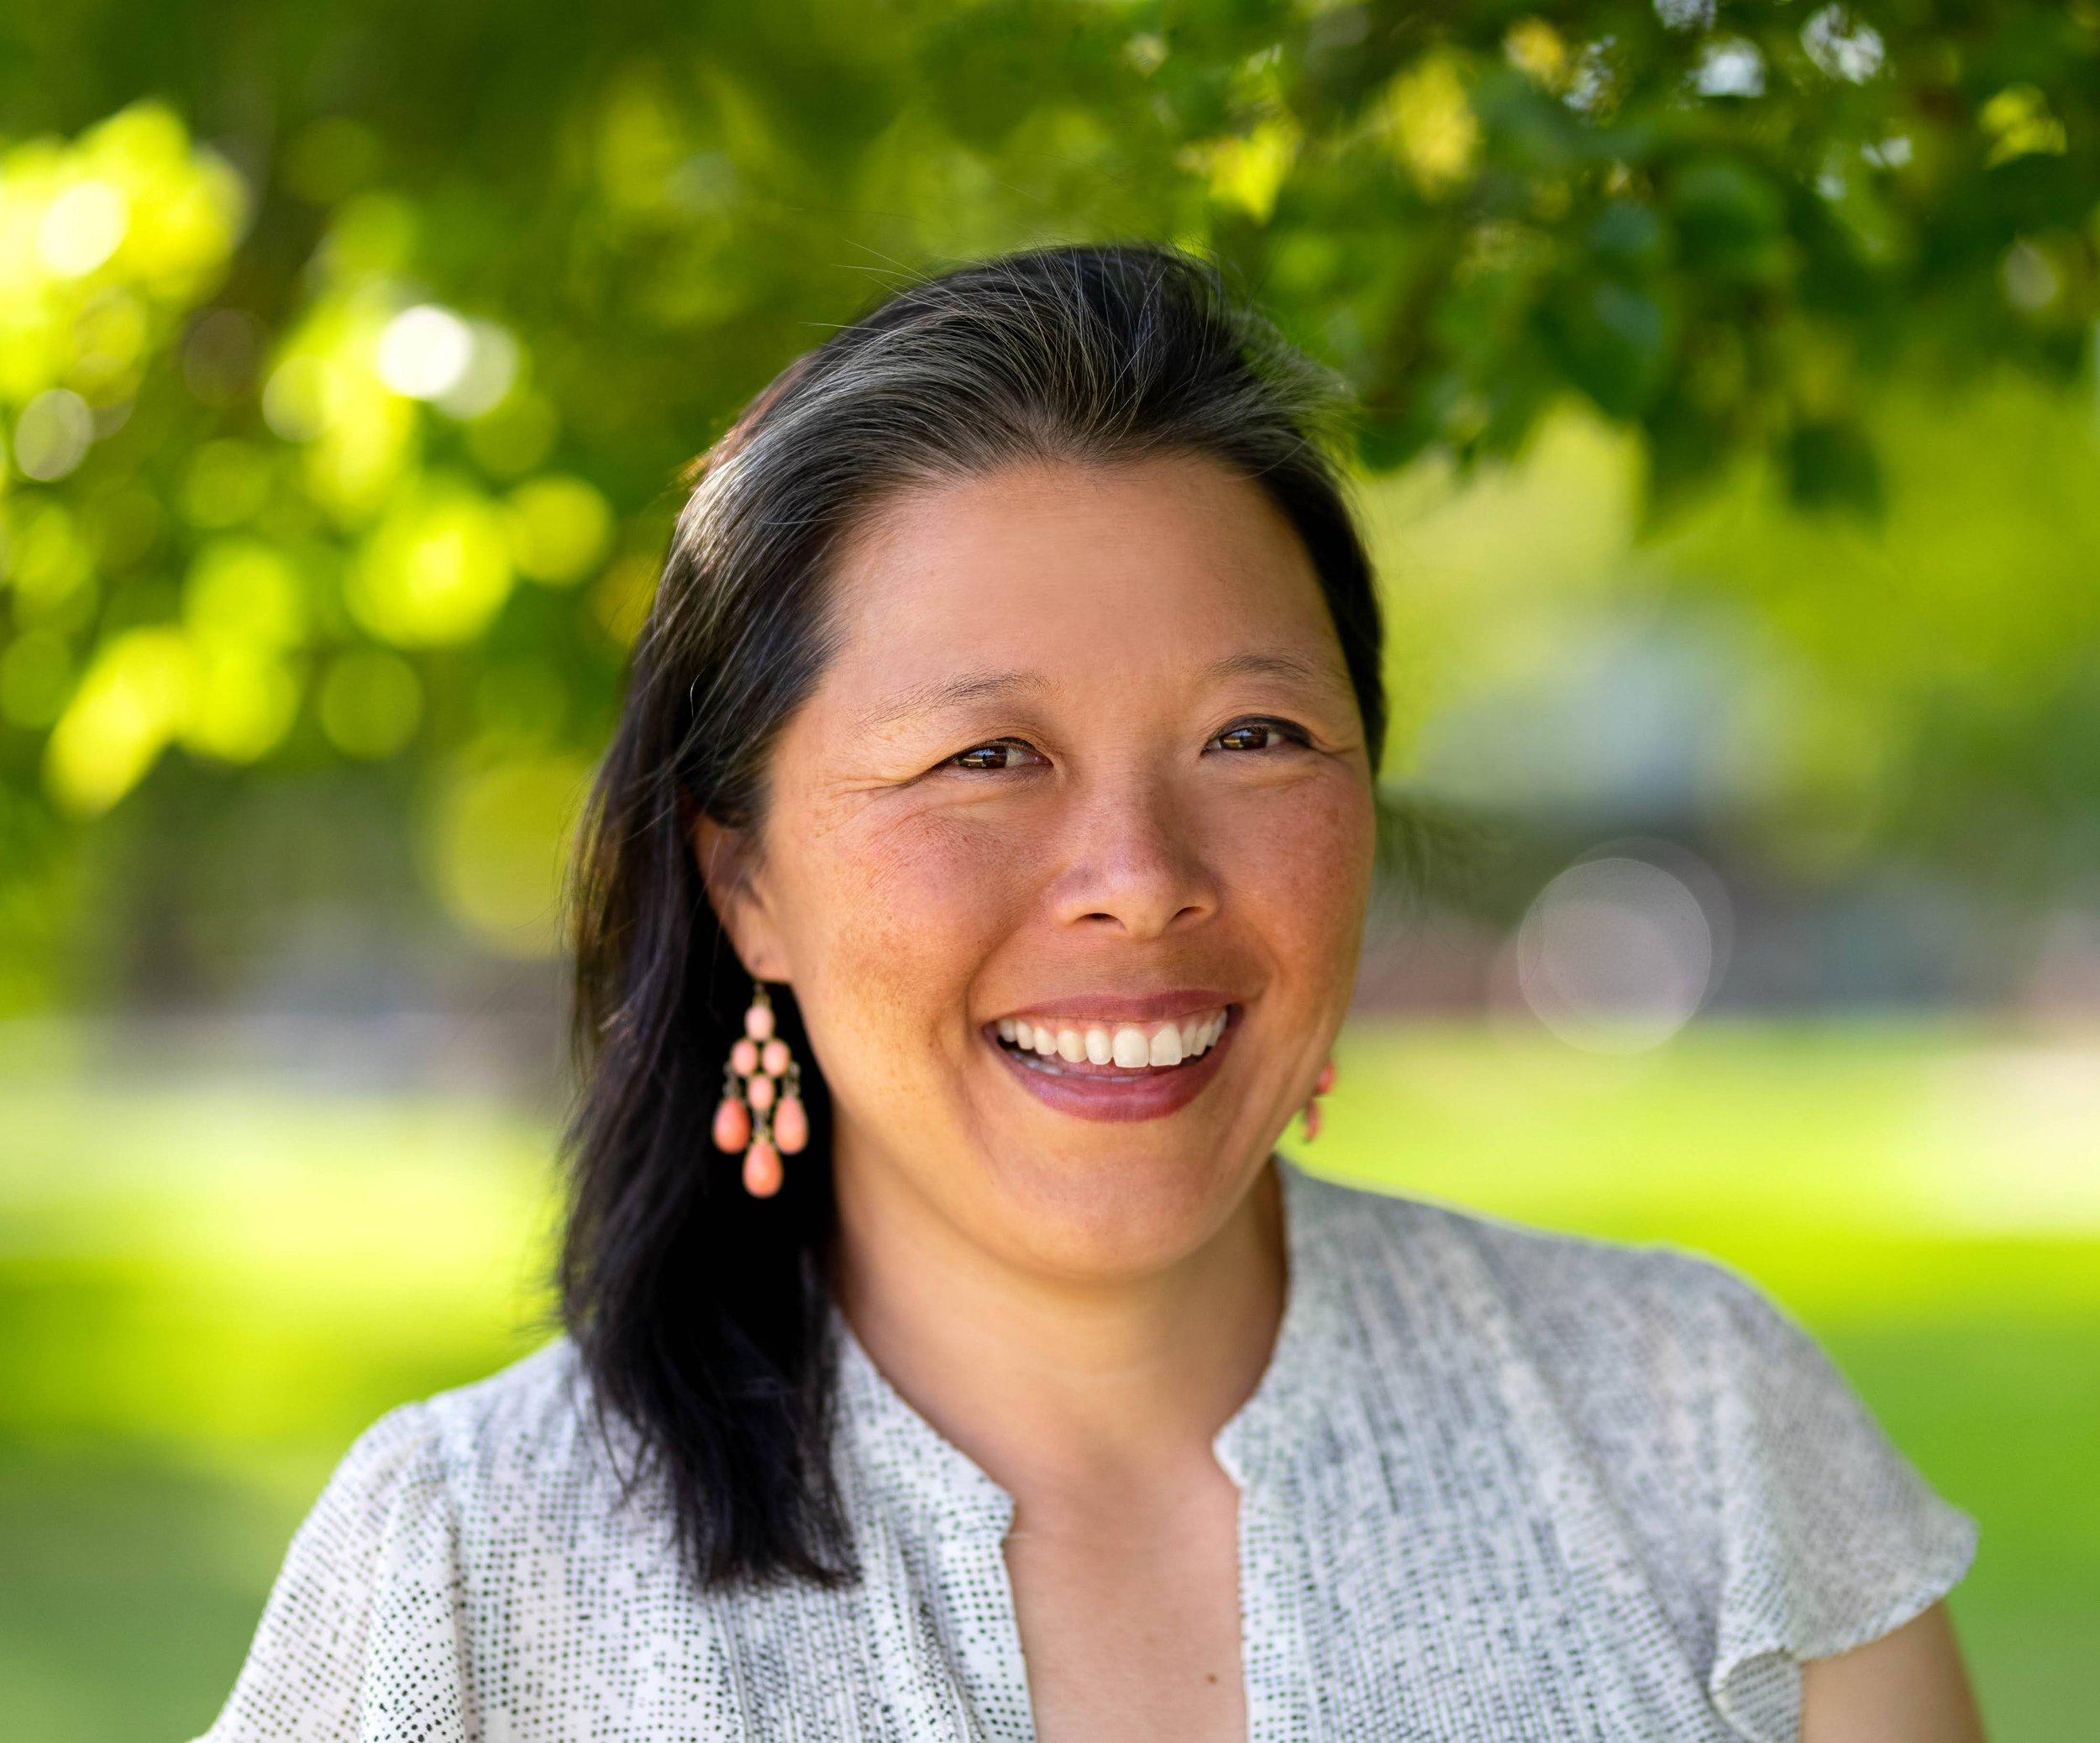 Portrait of a woman of Asian descent smiling at the camera. The background is blurred but appears to be outdoors.